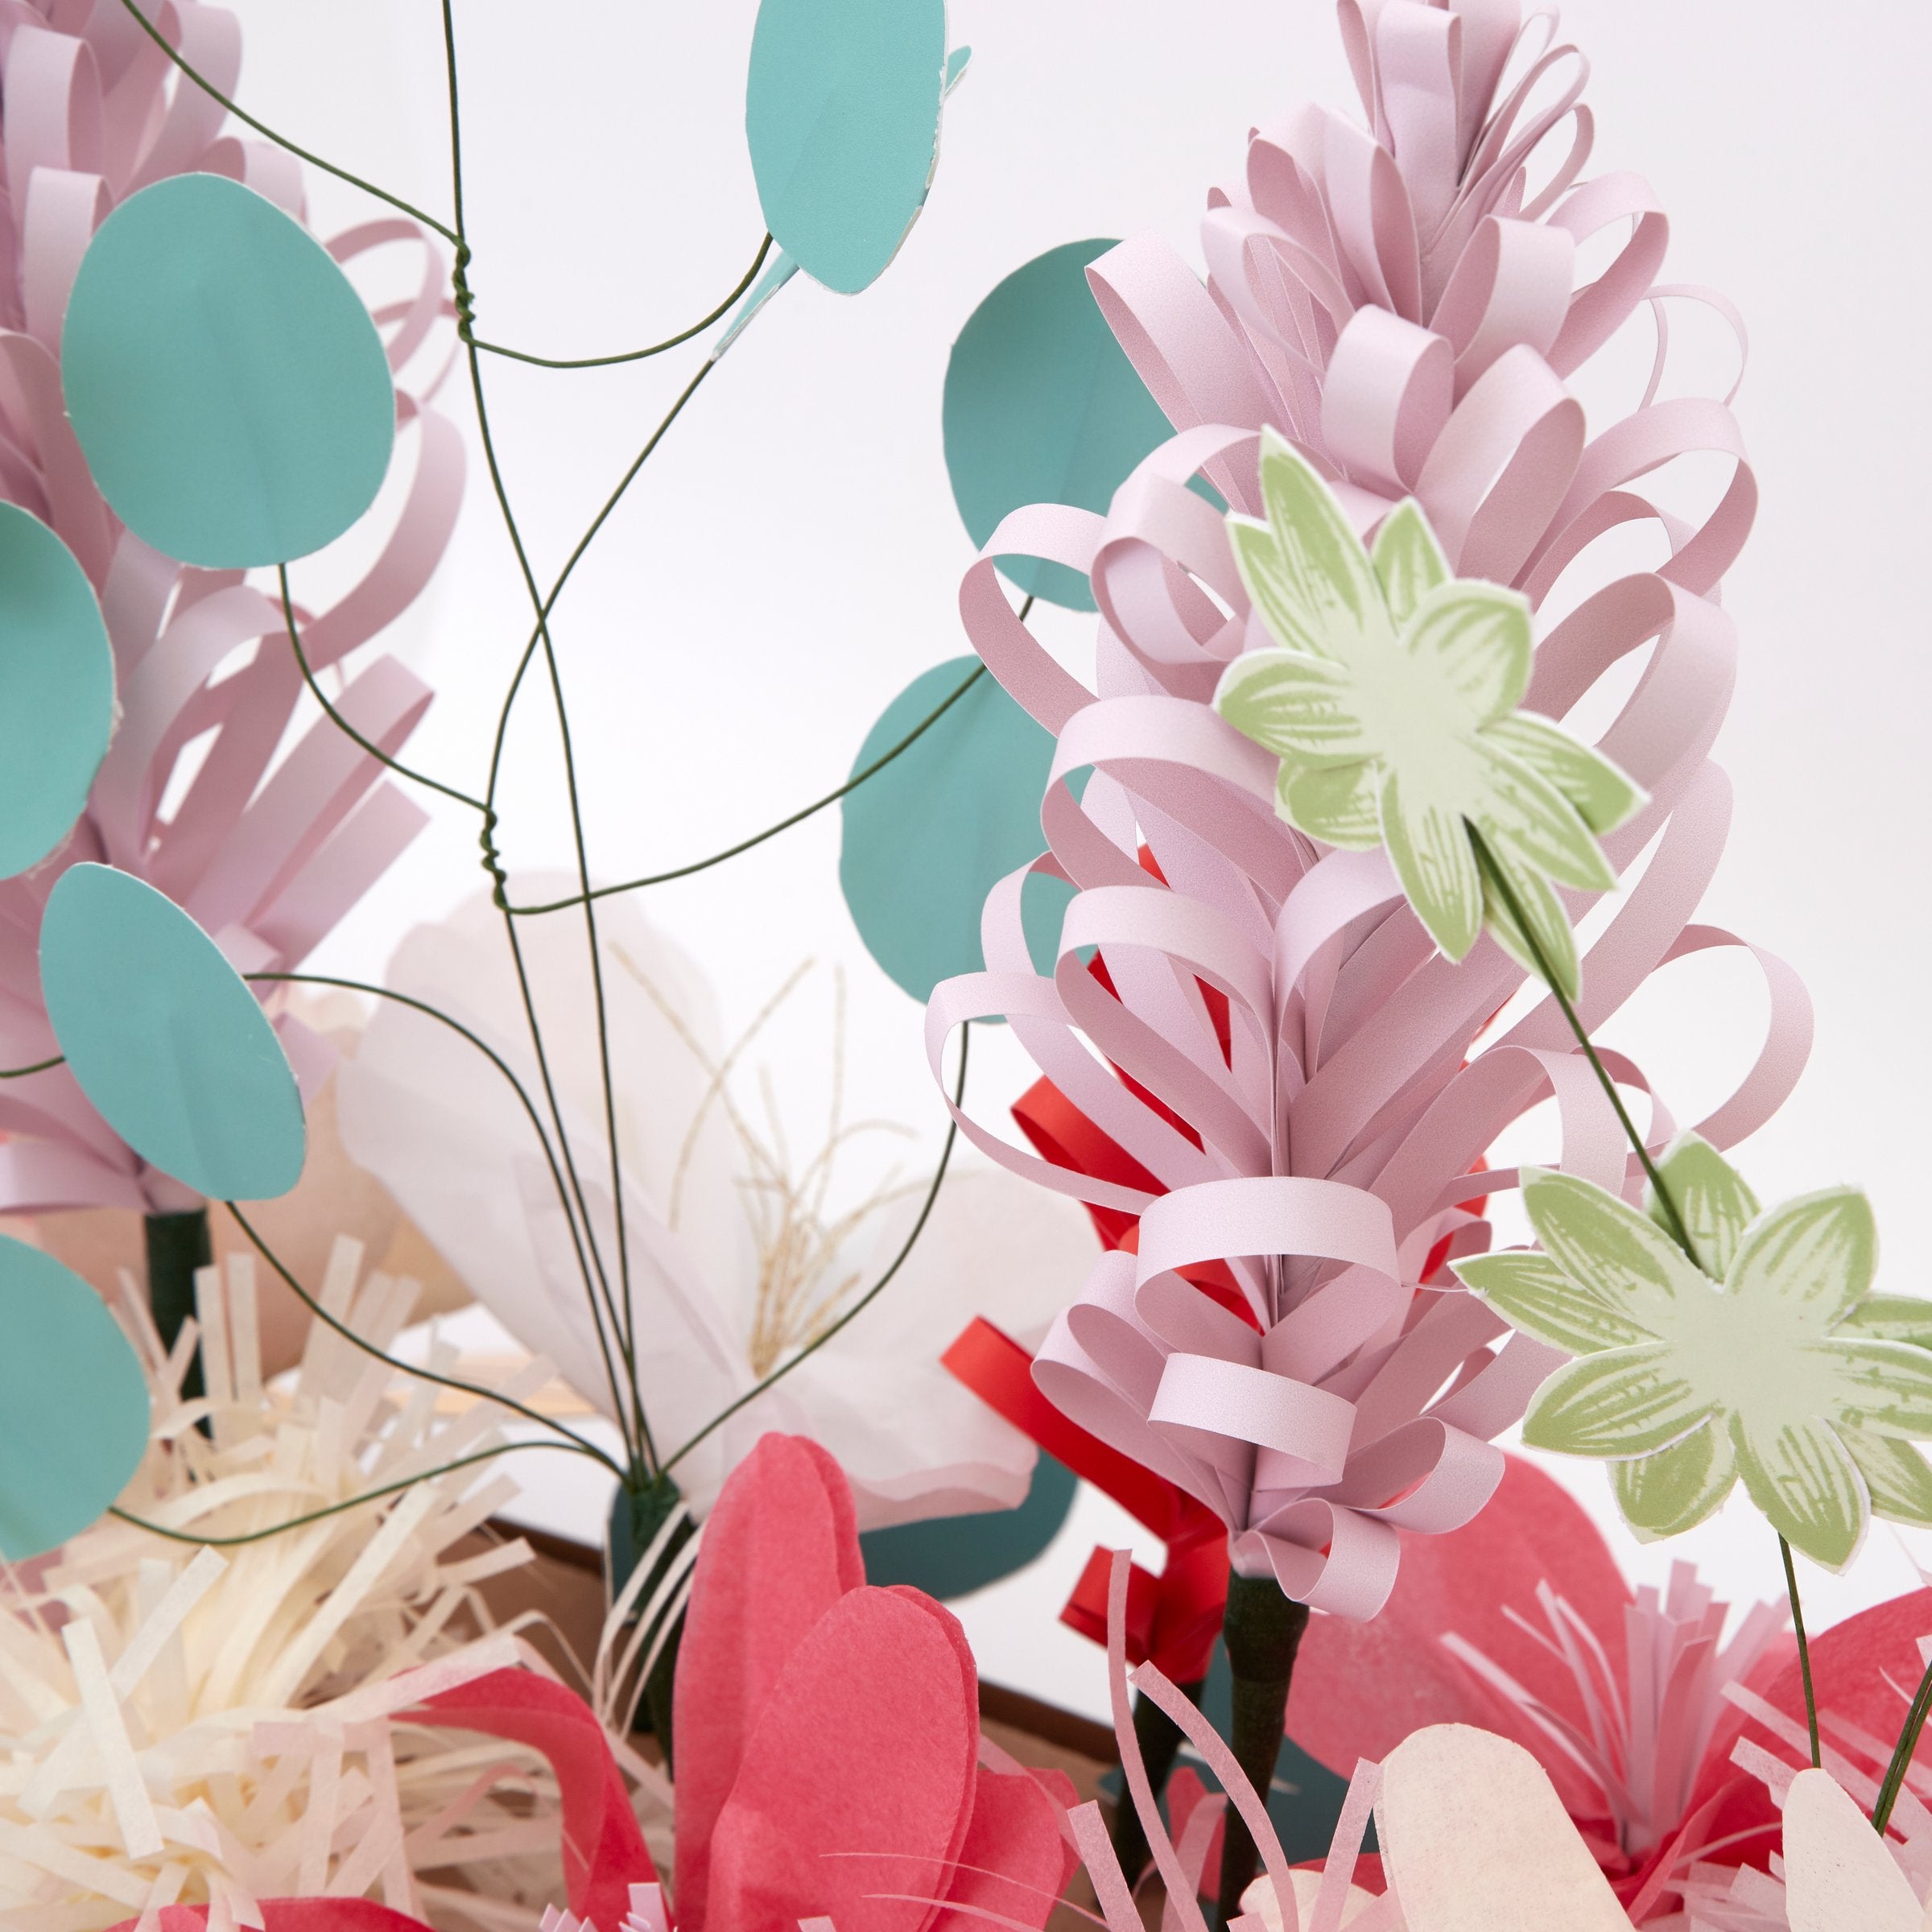 This Christmas table decoration is crafted from tissue paper flowers and foil topped paper leaves for a special look.